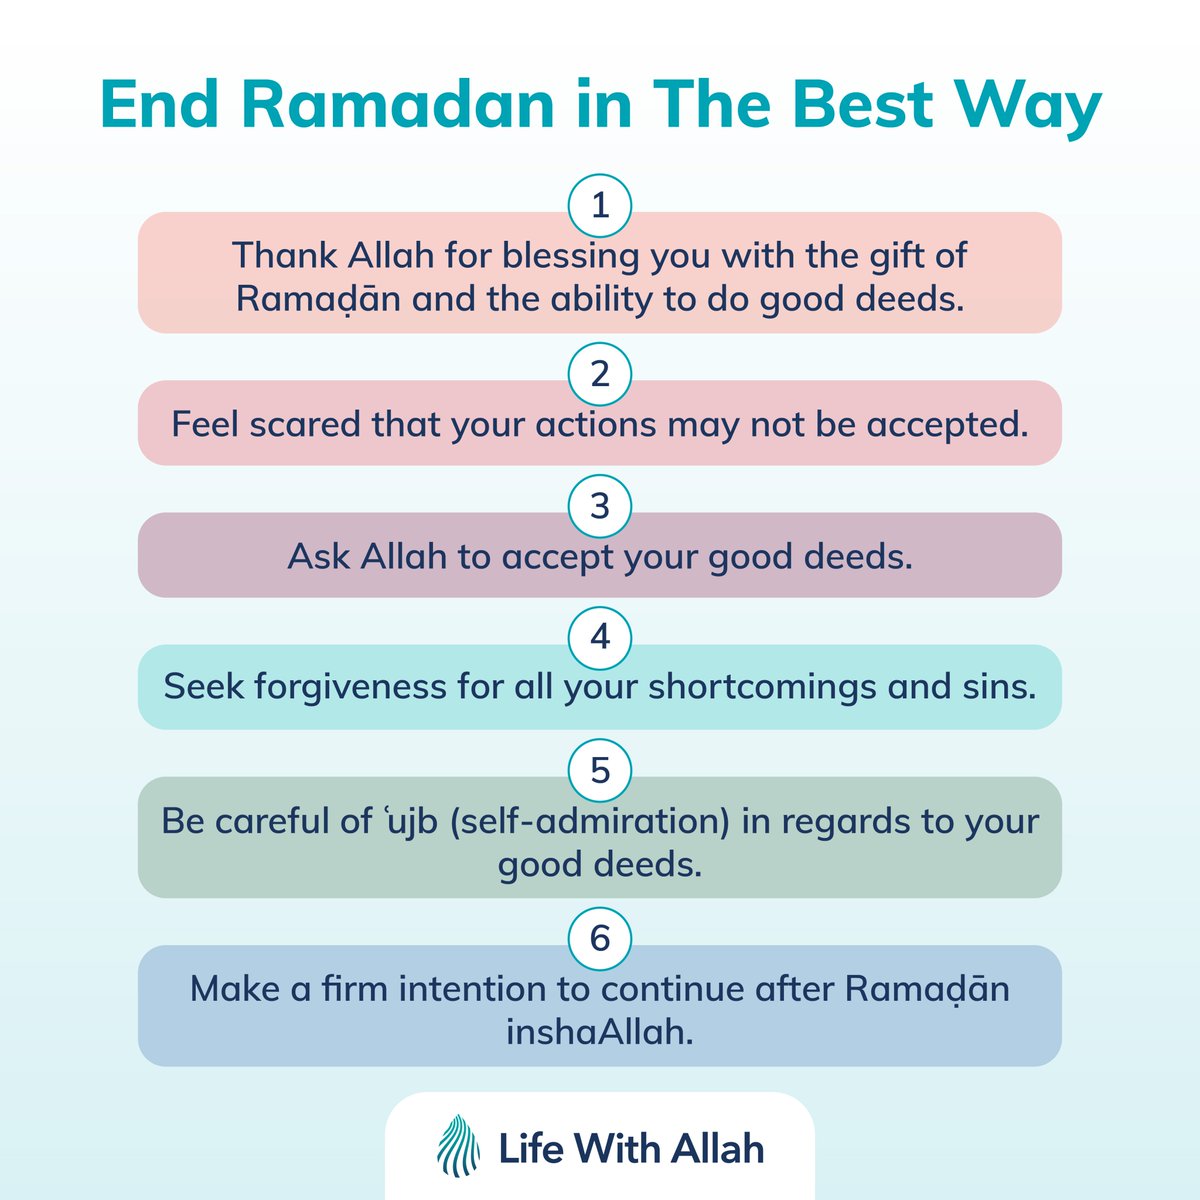 Article: Bidding Farewell to Ramadan Our hearts feel sad. Our cheeks are damp with tears. As we bid farewell to our beloved friend (i.e. Ramaḍān), we reflect on the shortness of its visit. Is this a metaphor for life? Will it pass by like the blink of an eye? Let us not waste…